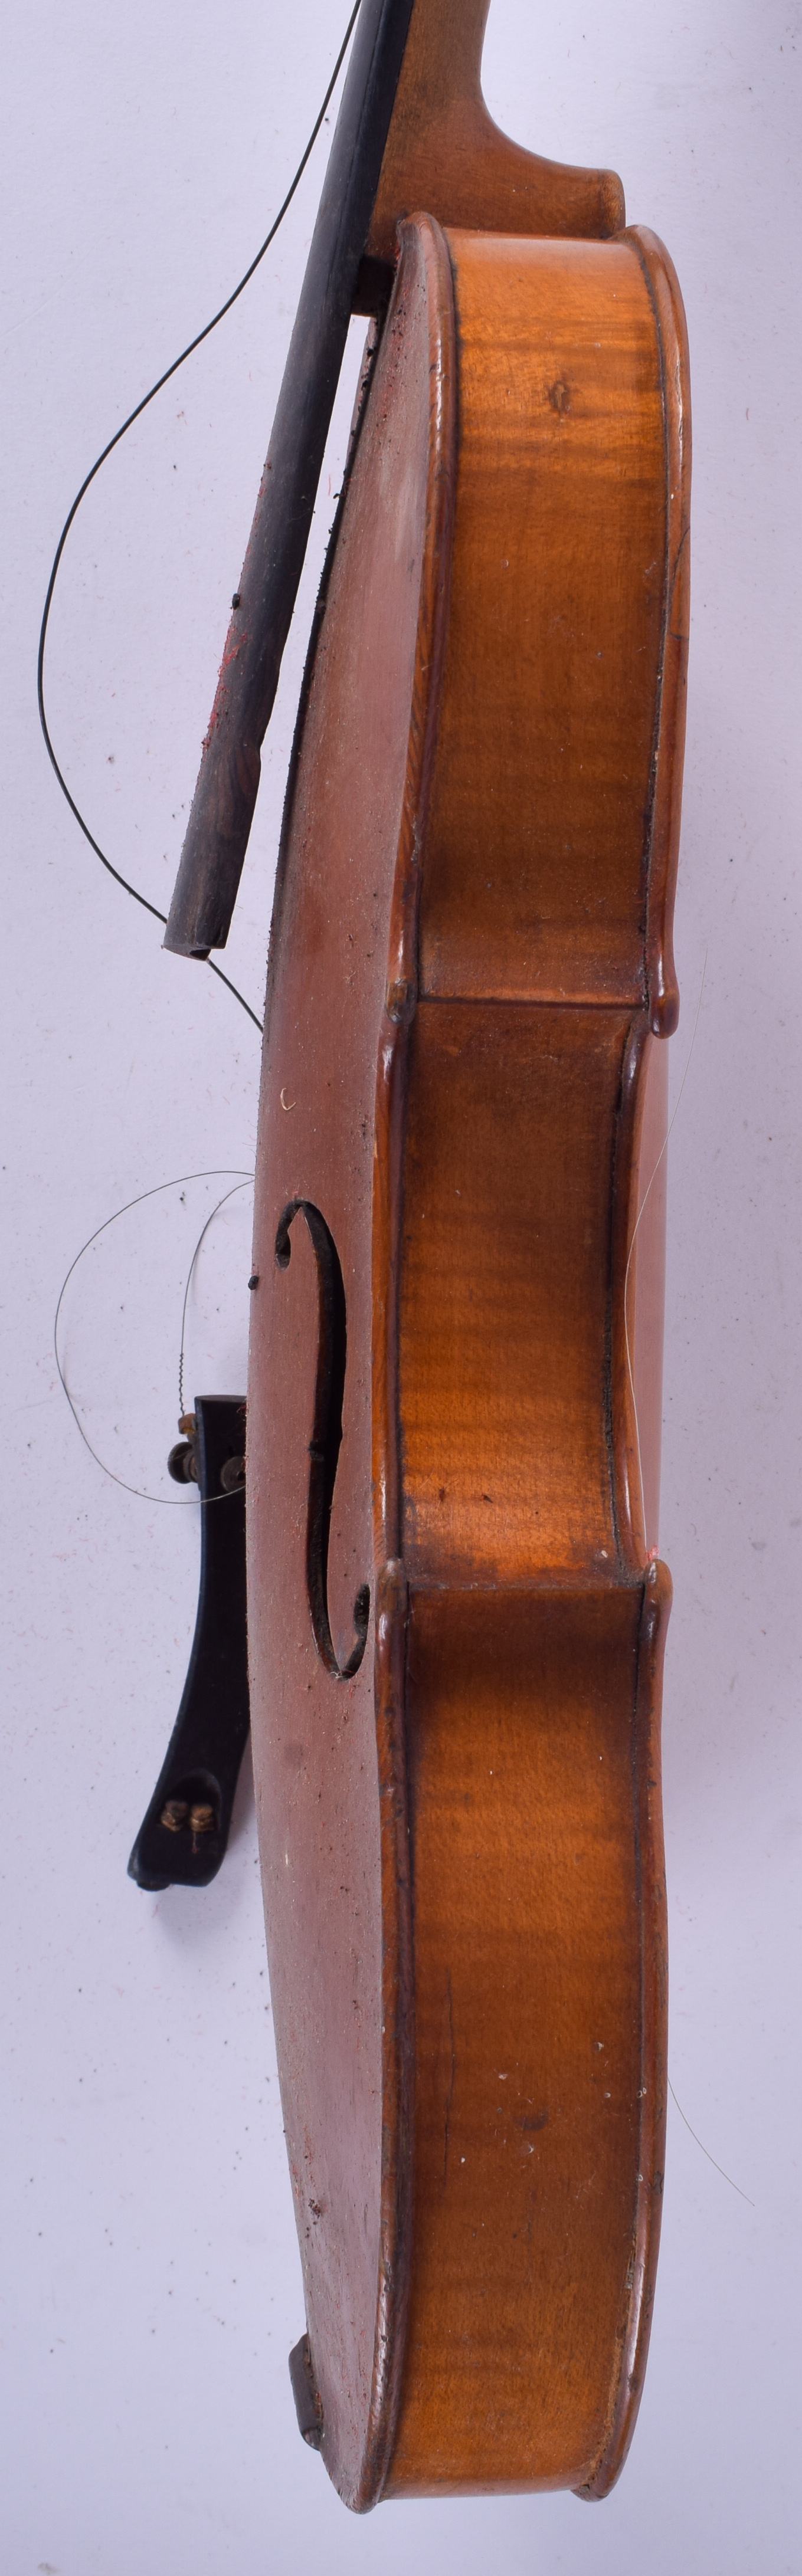 AN ANTIQUE EUROPEAN CASED VIOLIN within a very unusual saw tooth style leather case. 55 cm long. - Image 5 of 9